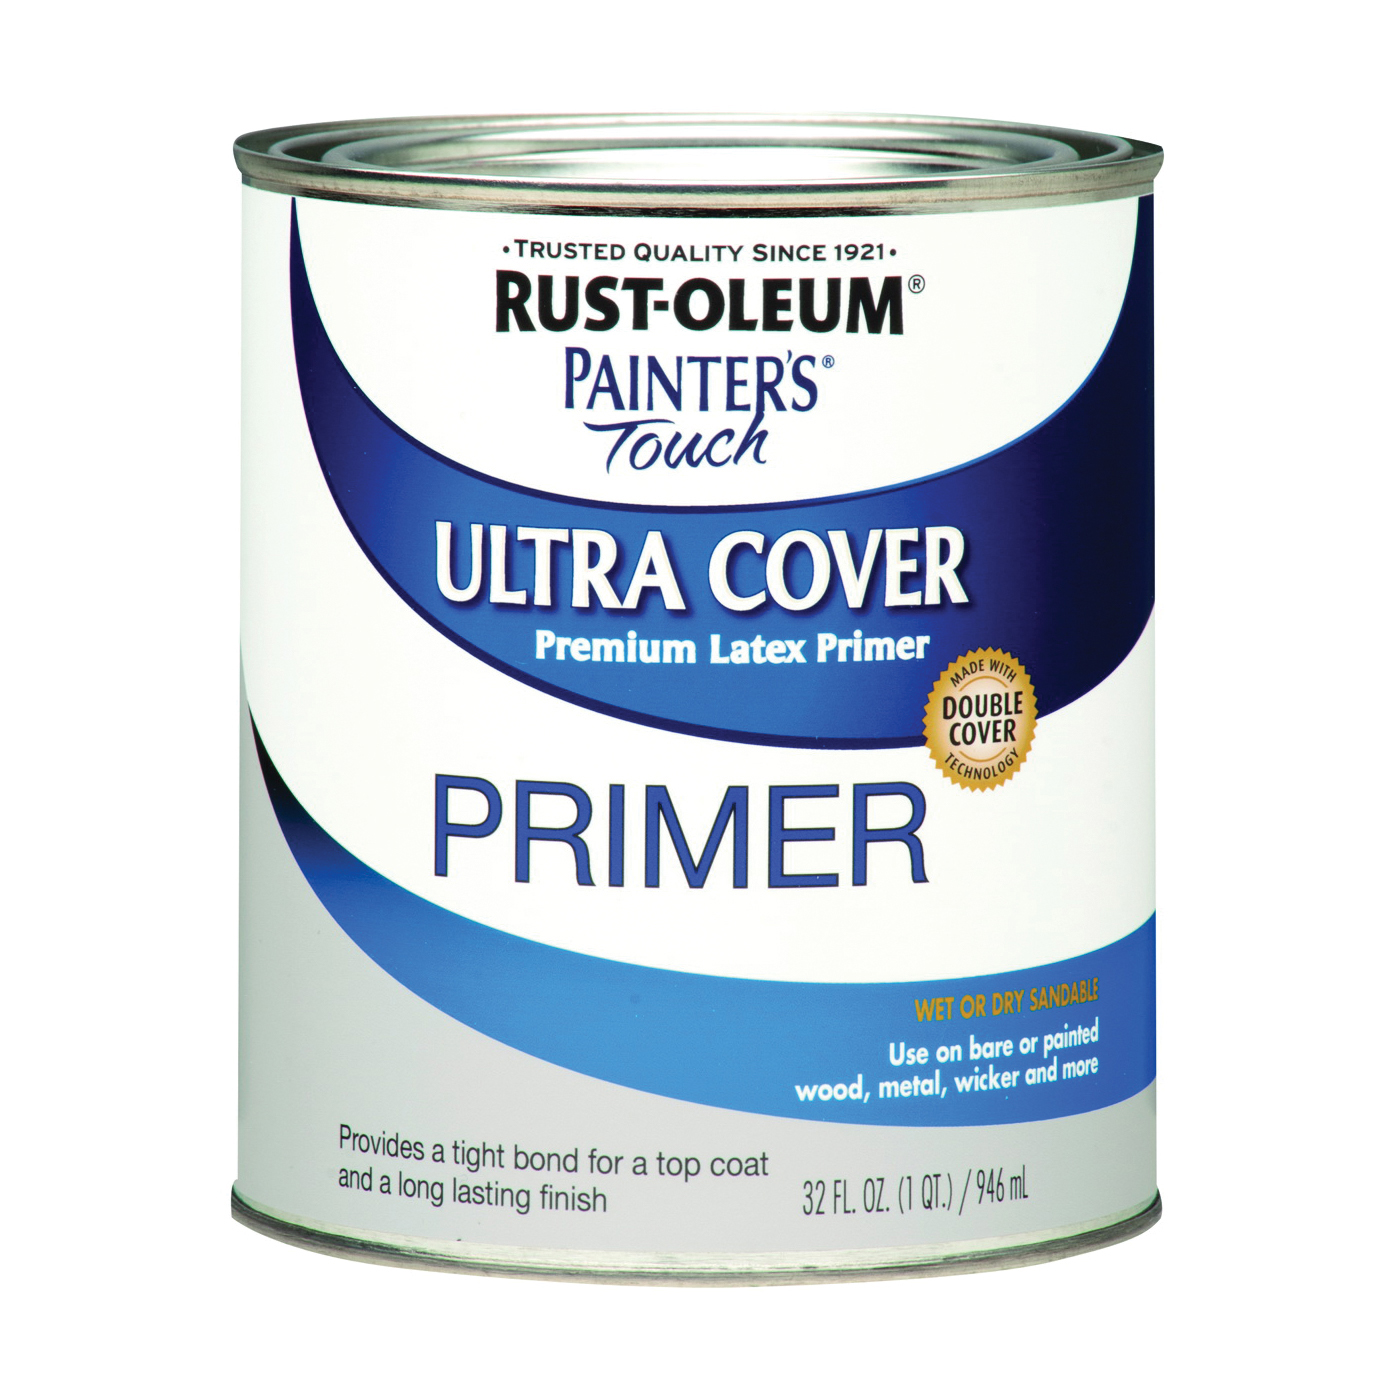 RUST-OLEUM PAINTER'S Touch 1980502 Brush-On Primer, Flat, Gray, 1 qt, Can - 1